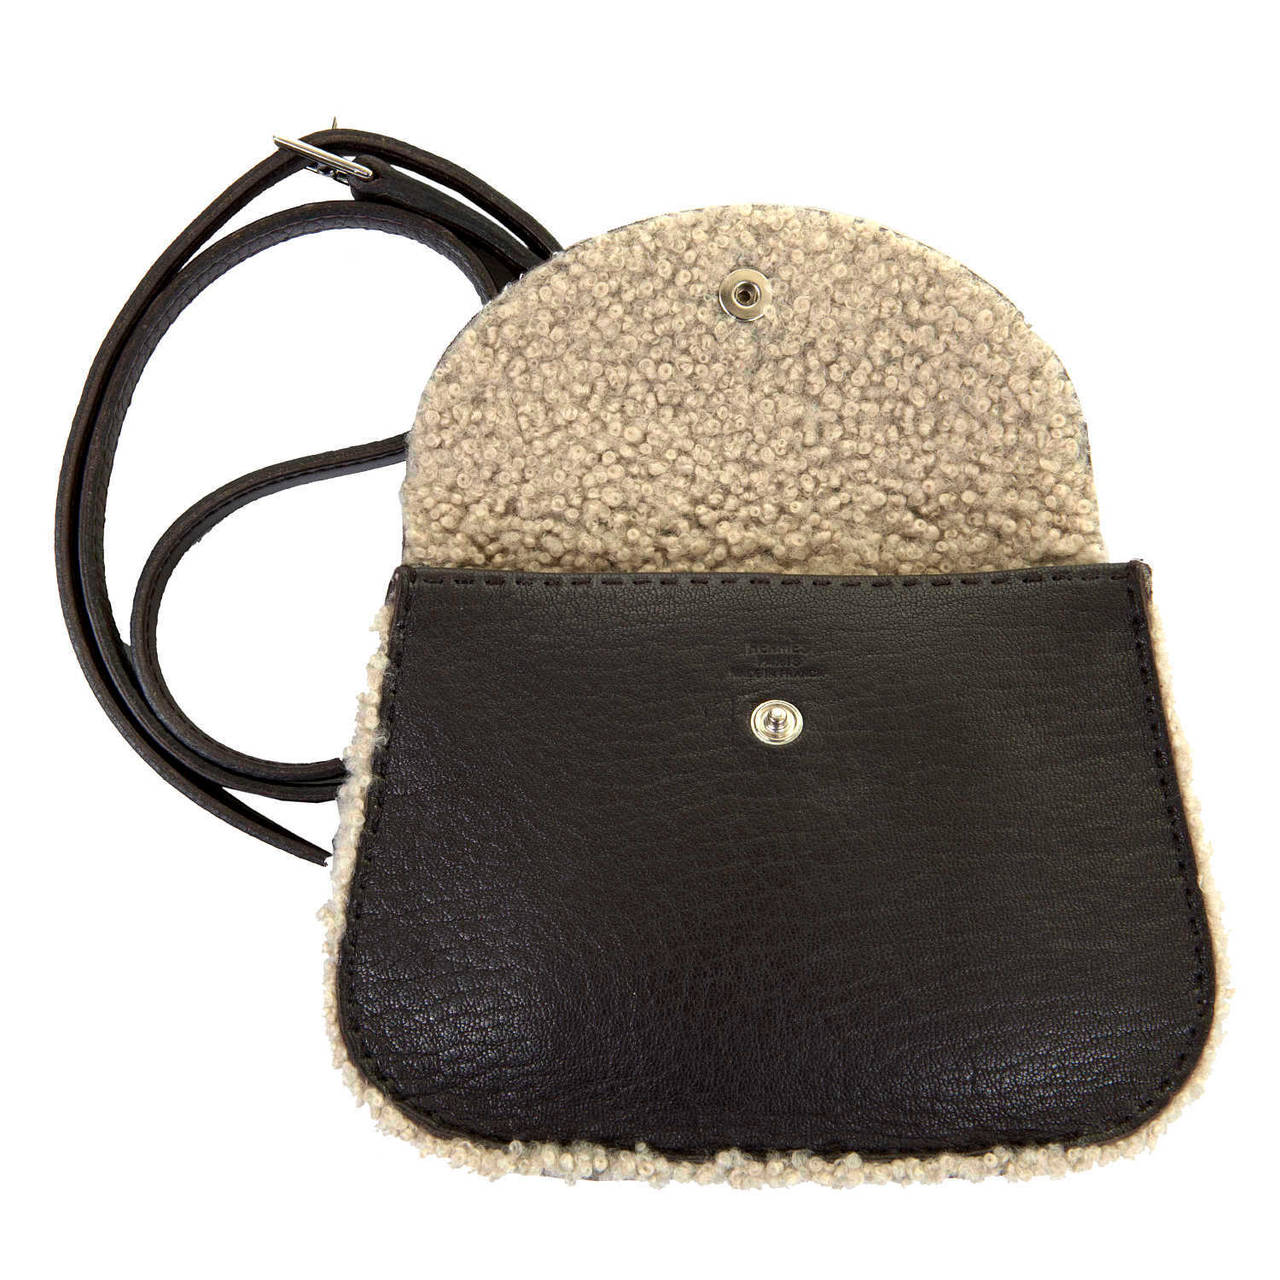 A rare & delightful Hermes Sheepskin Cross-Body or Shoulder Bag. Finished in Chocolate Brown Shearling with Silver Palladium Hardware. The bag with it's adjustable  and detachable strap, can be worn as a Clutch or a Shoulder or Cross-Body bag. The